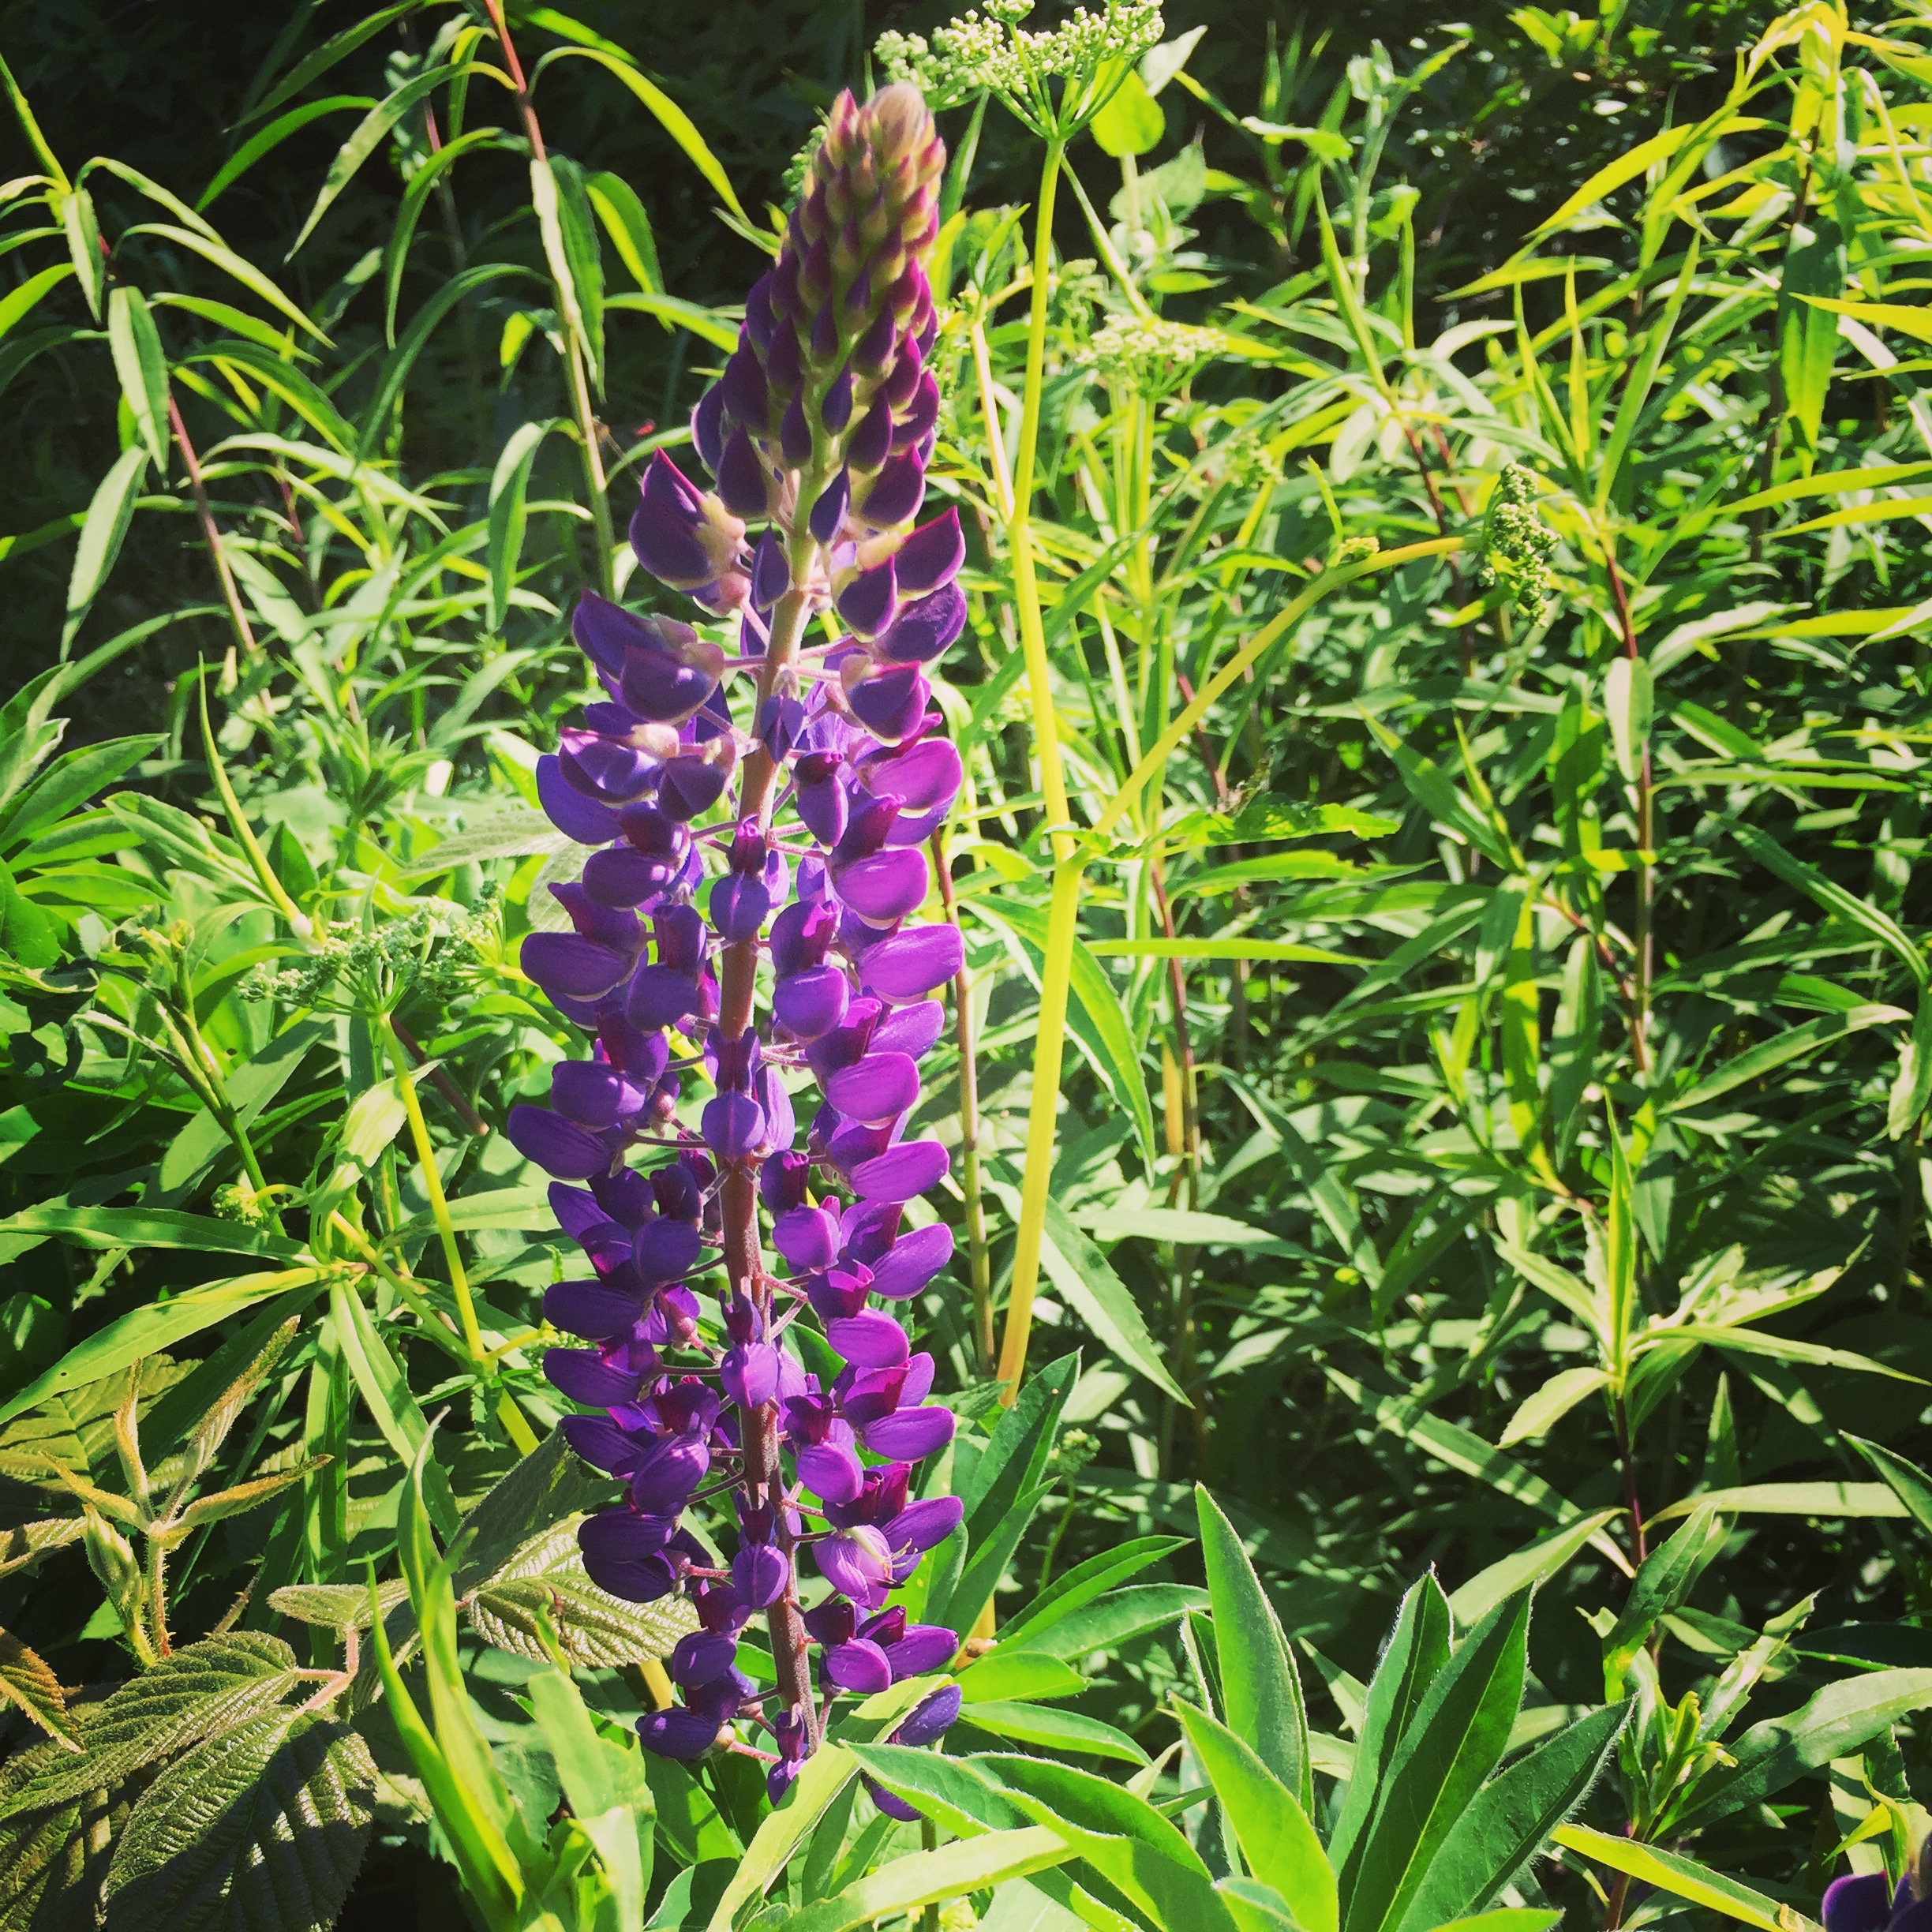  Here’s one of the few lupine spikes that have bloomed already. 